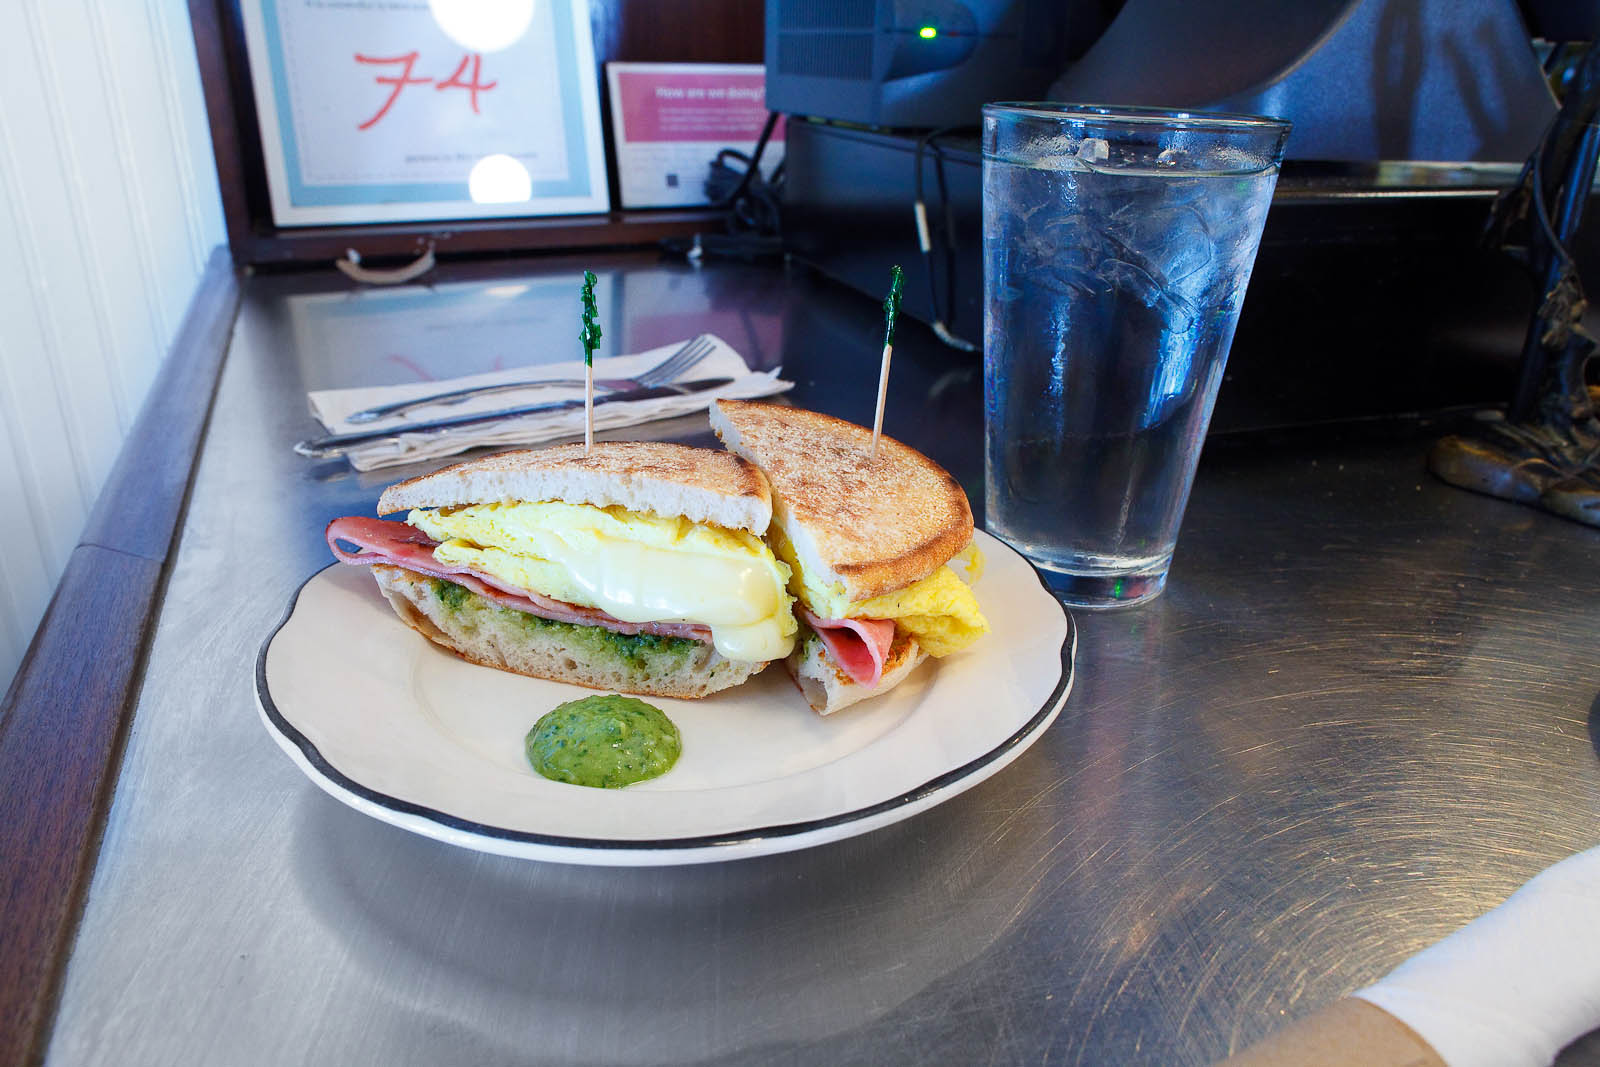 Penny Egg Sandwich - scrambled eggs with american cheese, pesto, and ham on an english muffin ($8)